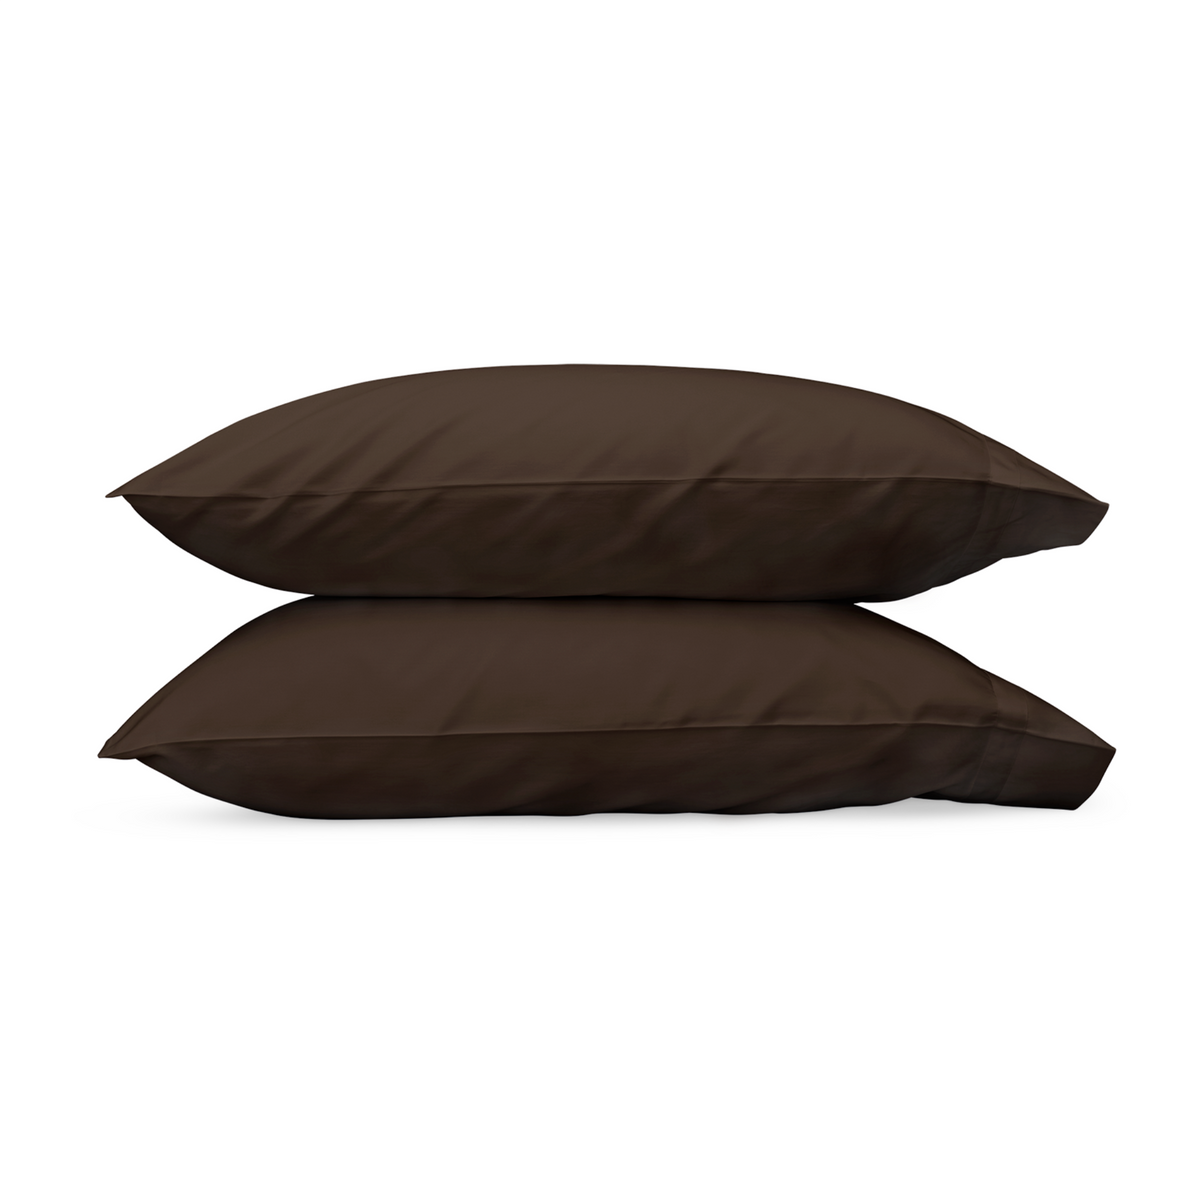 Pair of Pillowcases of Matouk Nocturne Bedding in Sable Color